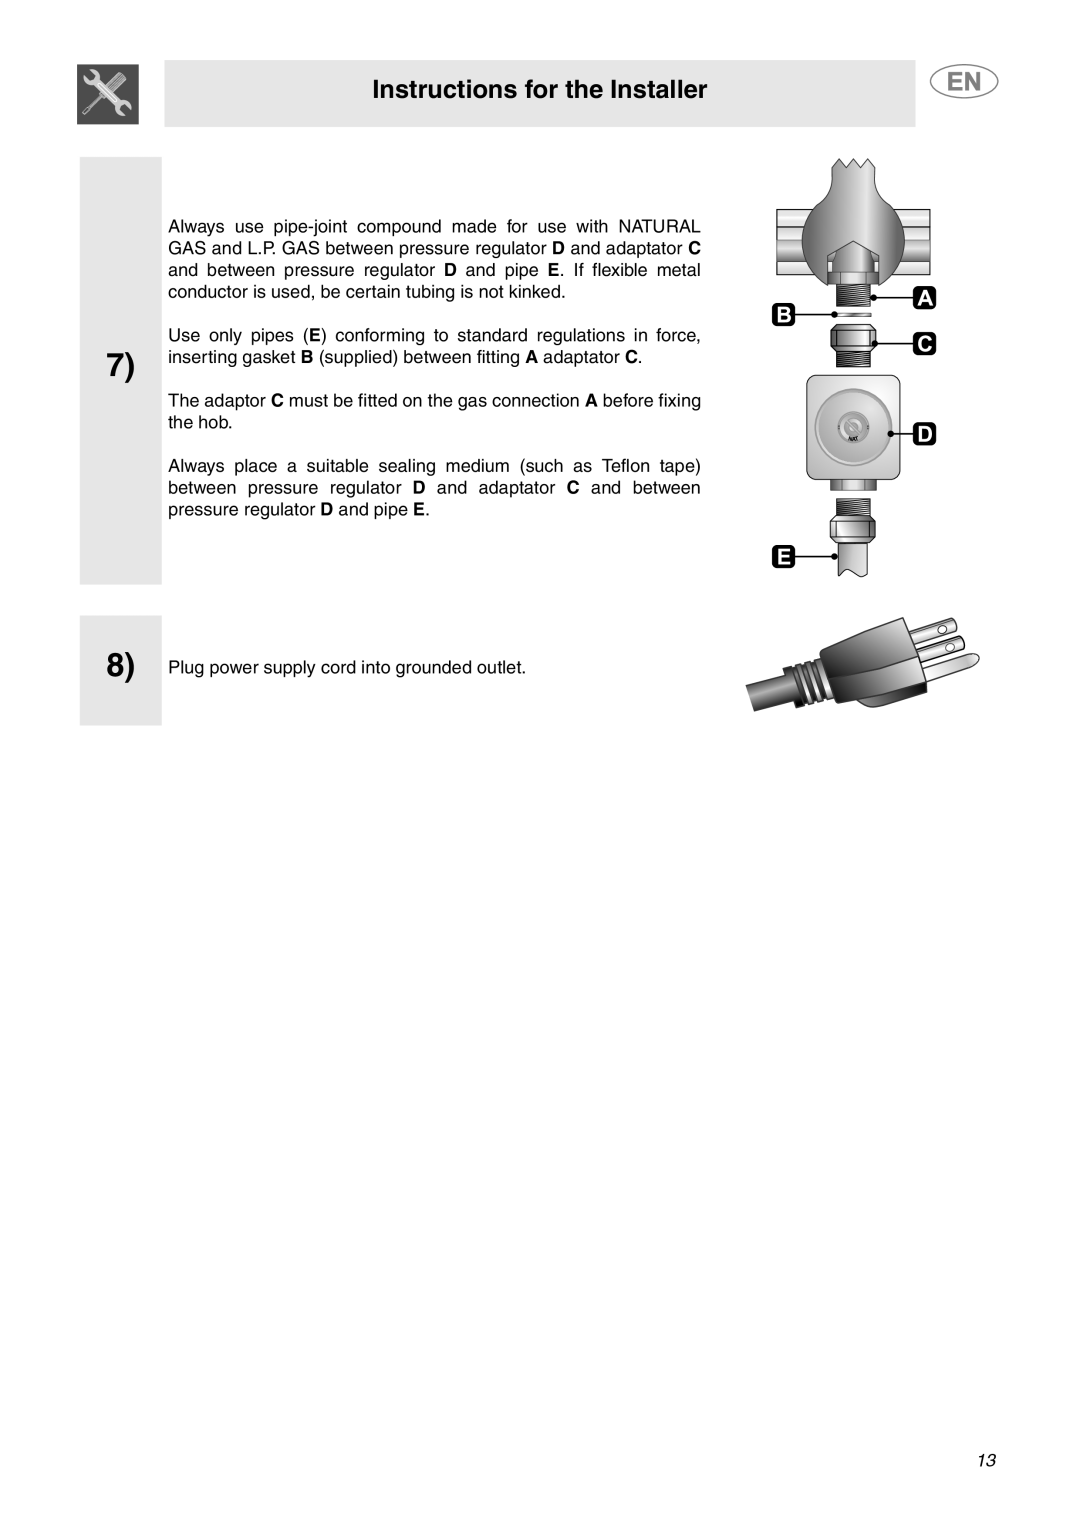 Smeg PU106 Gas, PU75, PU64 Instructions for the Installer, Plug power supply cord into grounded outlet 